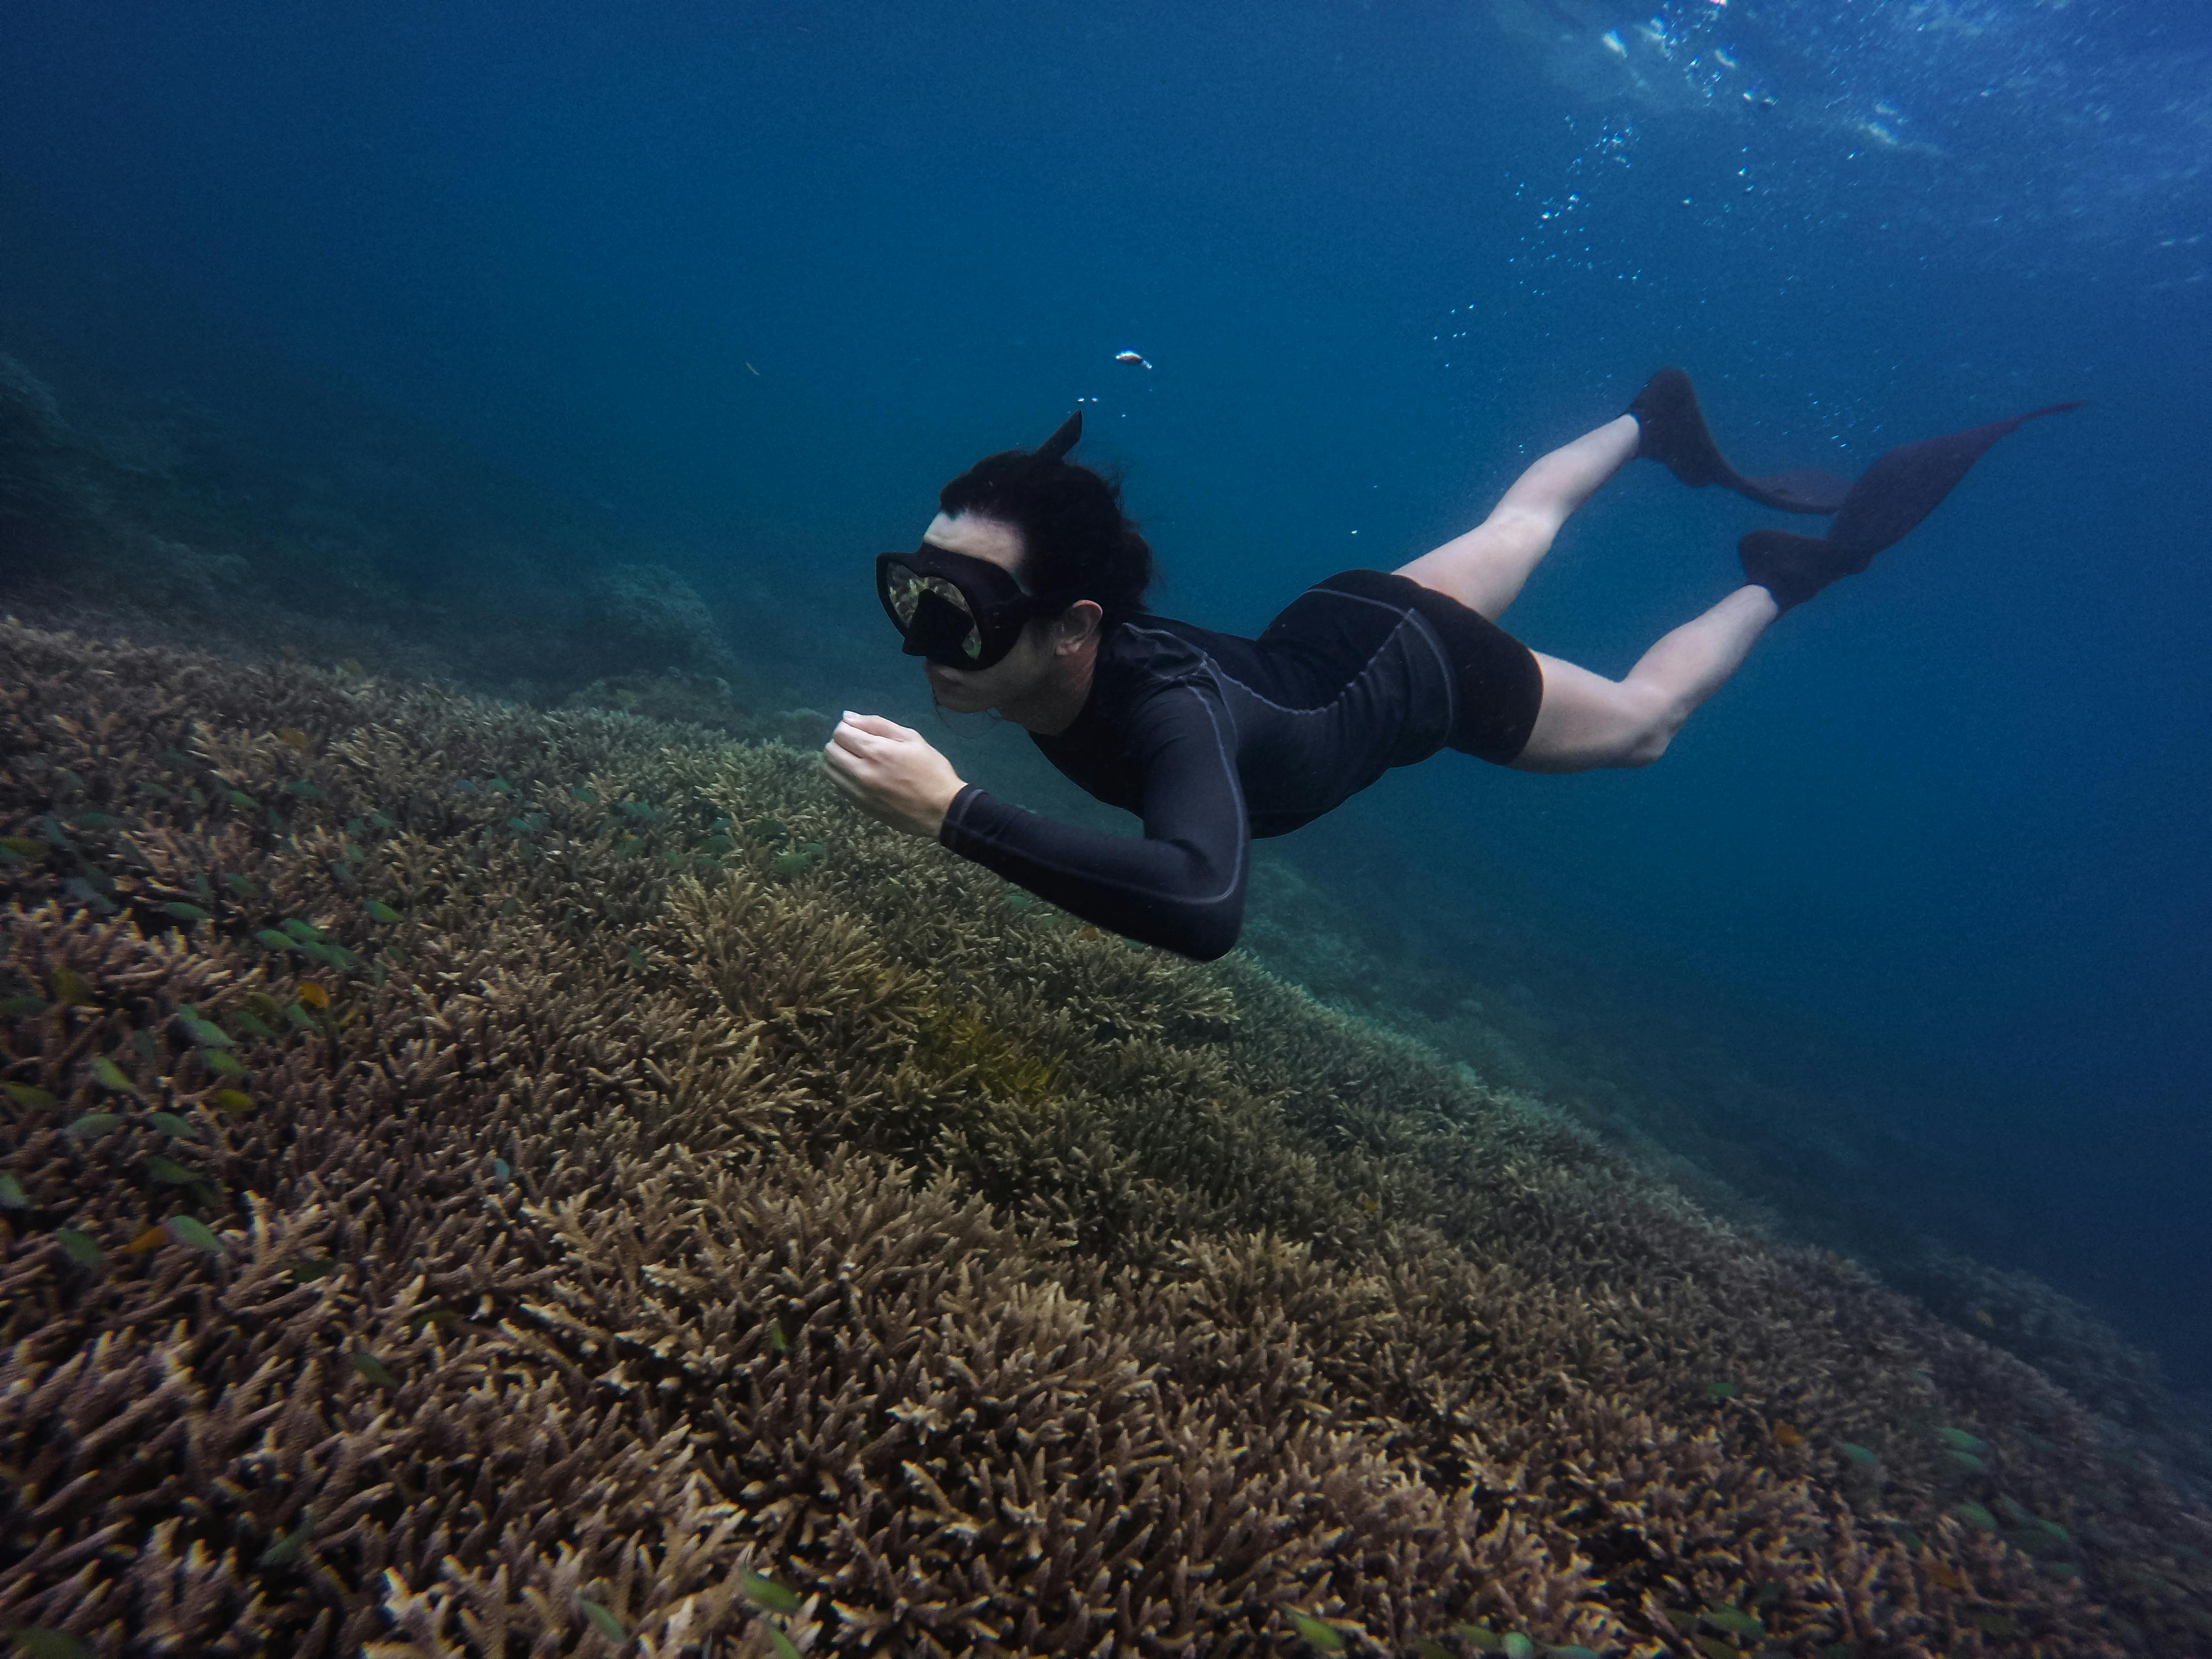 Snorkeling the Great Barrier Reef: Tips for an Underwater Adventure